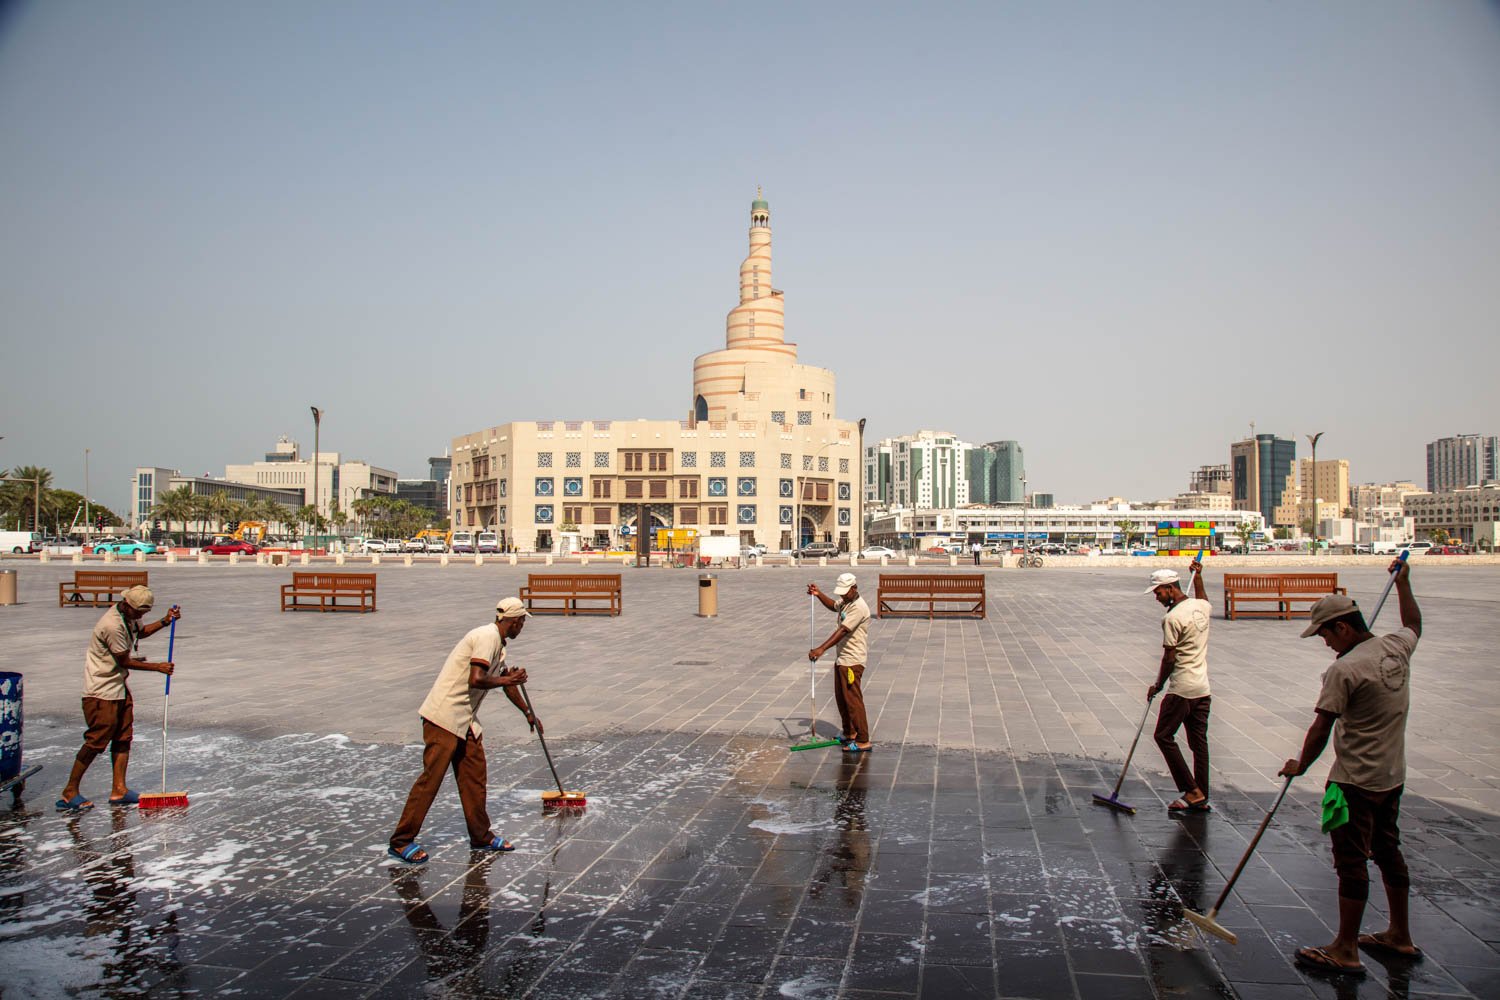  Foreign workers, mostly from Nepal, cleaning the old Souk in 120 degree heat in Doha, Qatar on August 16, 2022. 